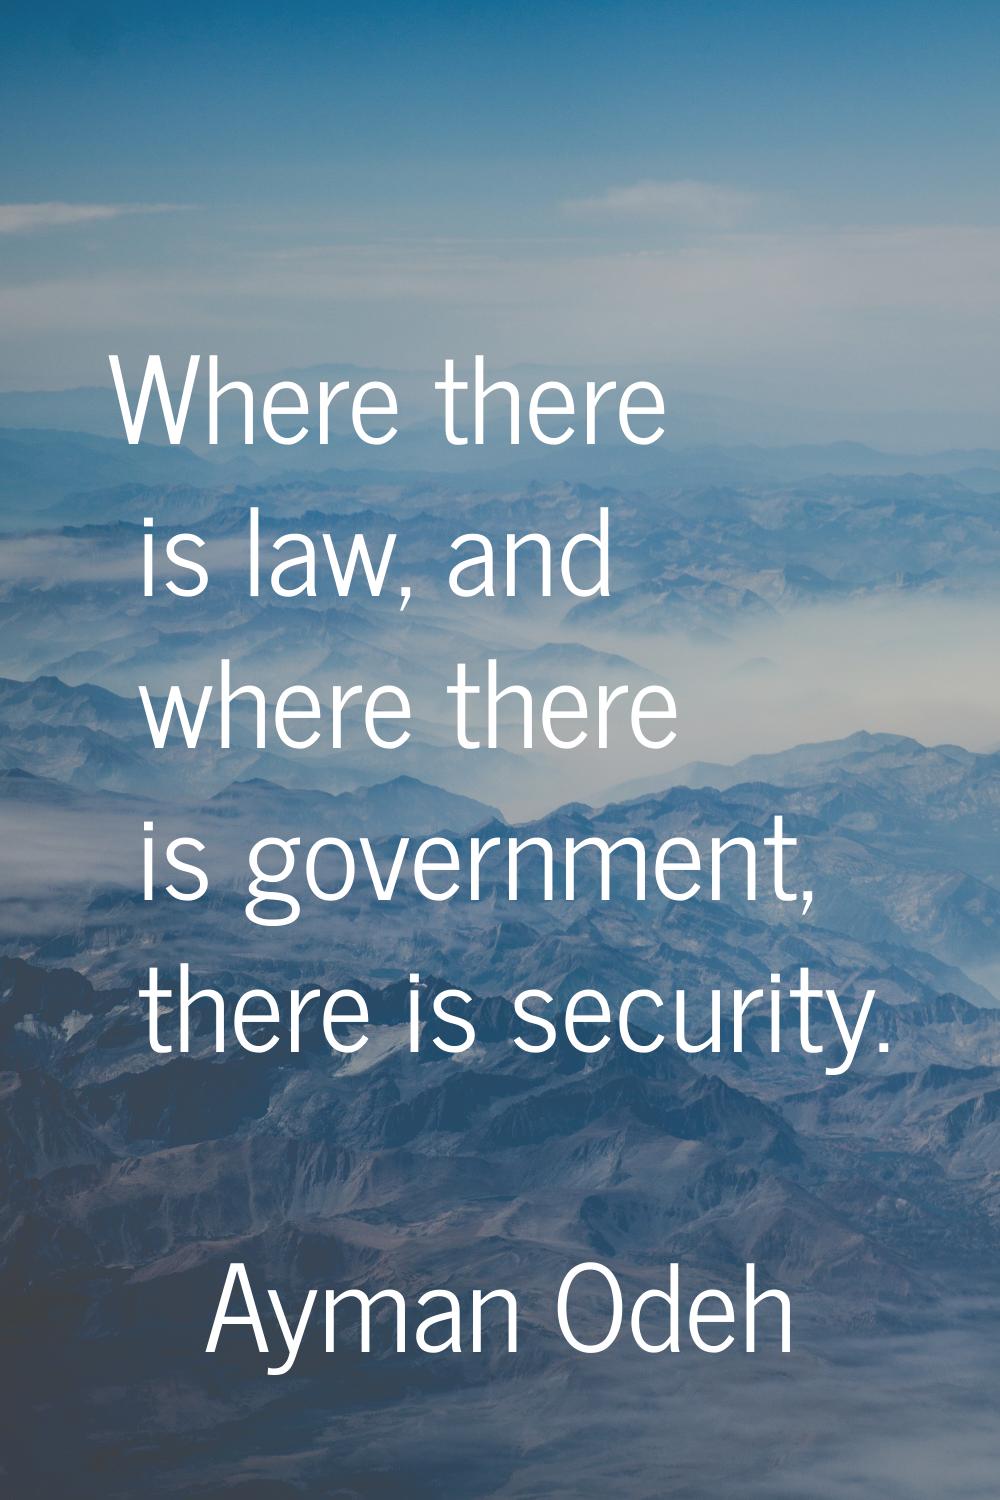 Where there is law, and where there is government, there is security.